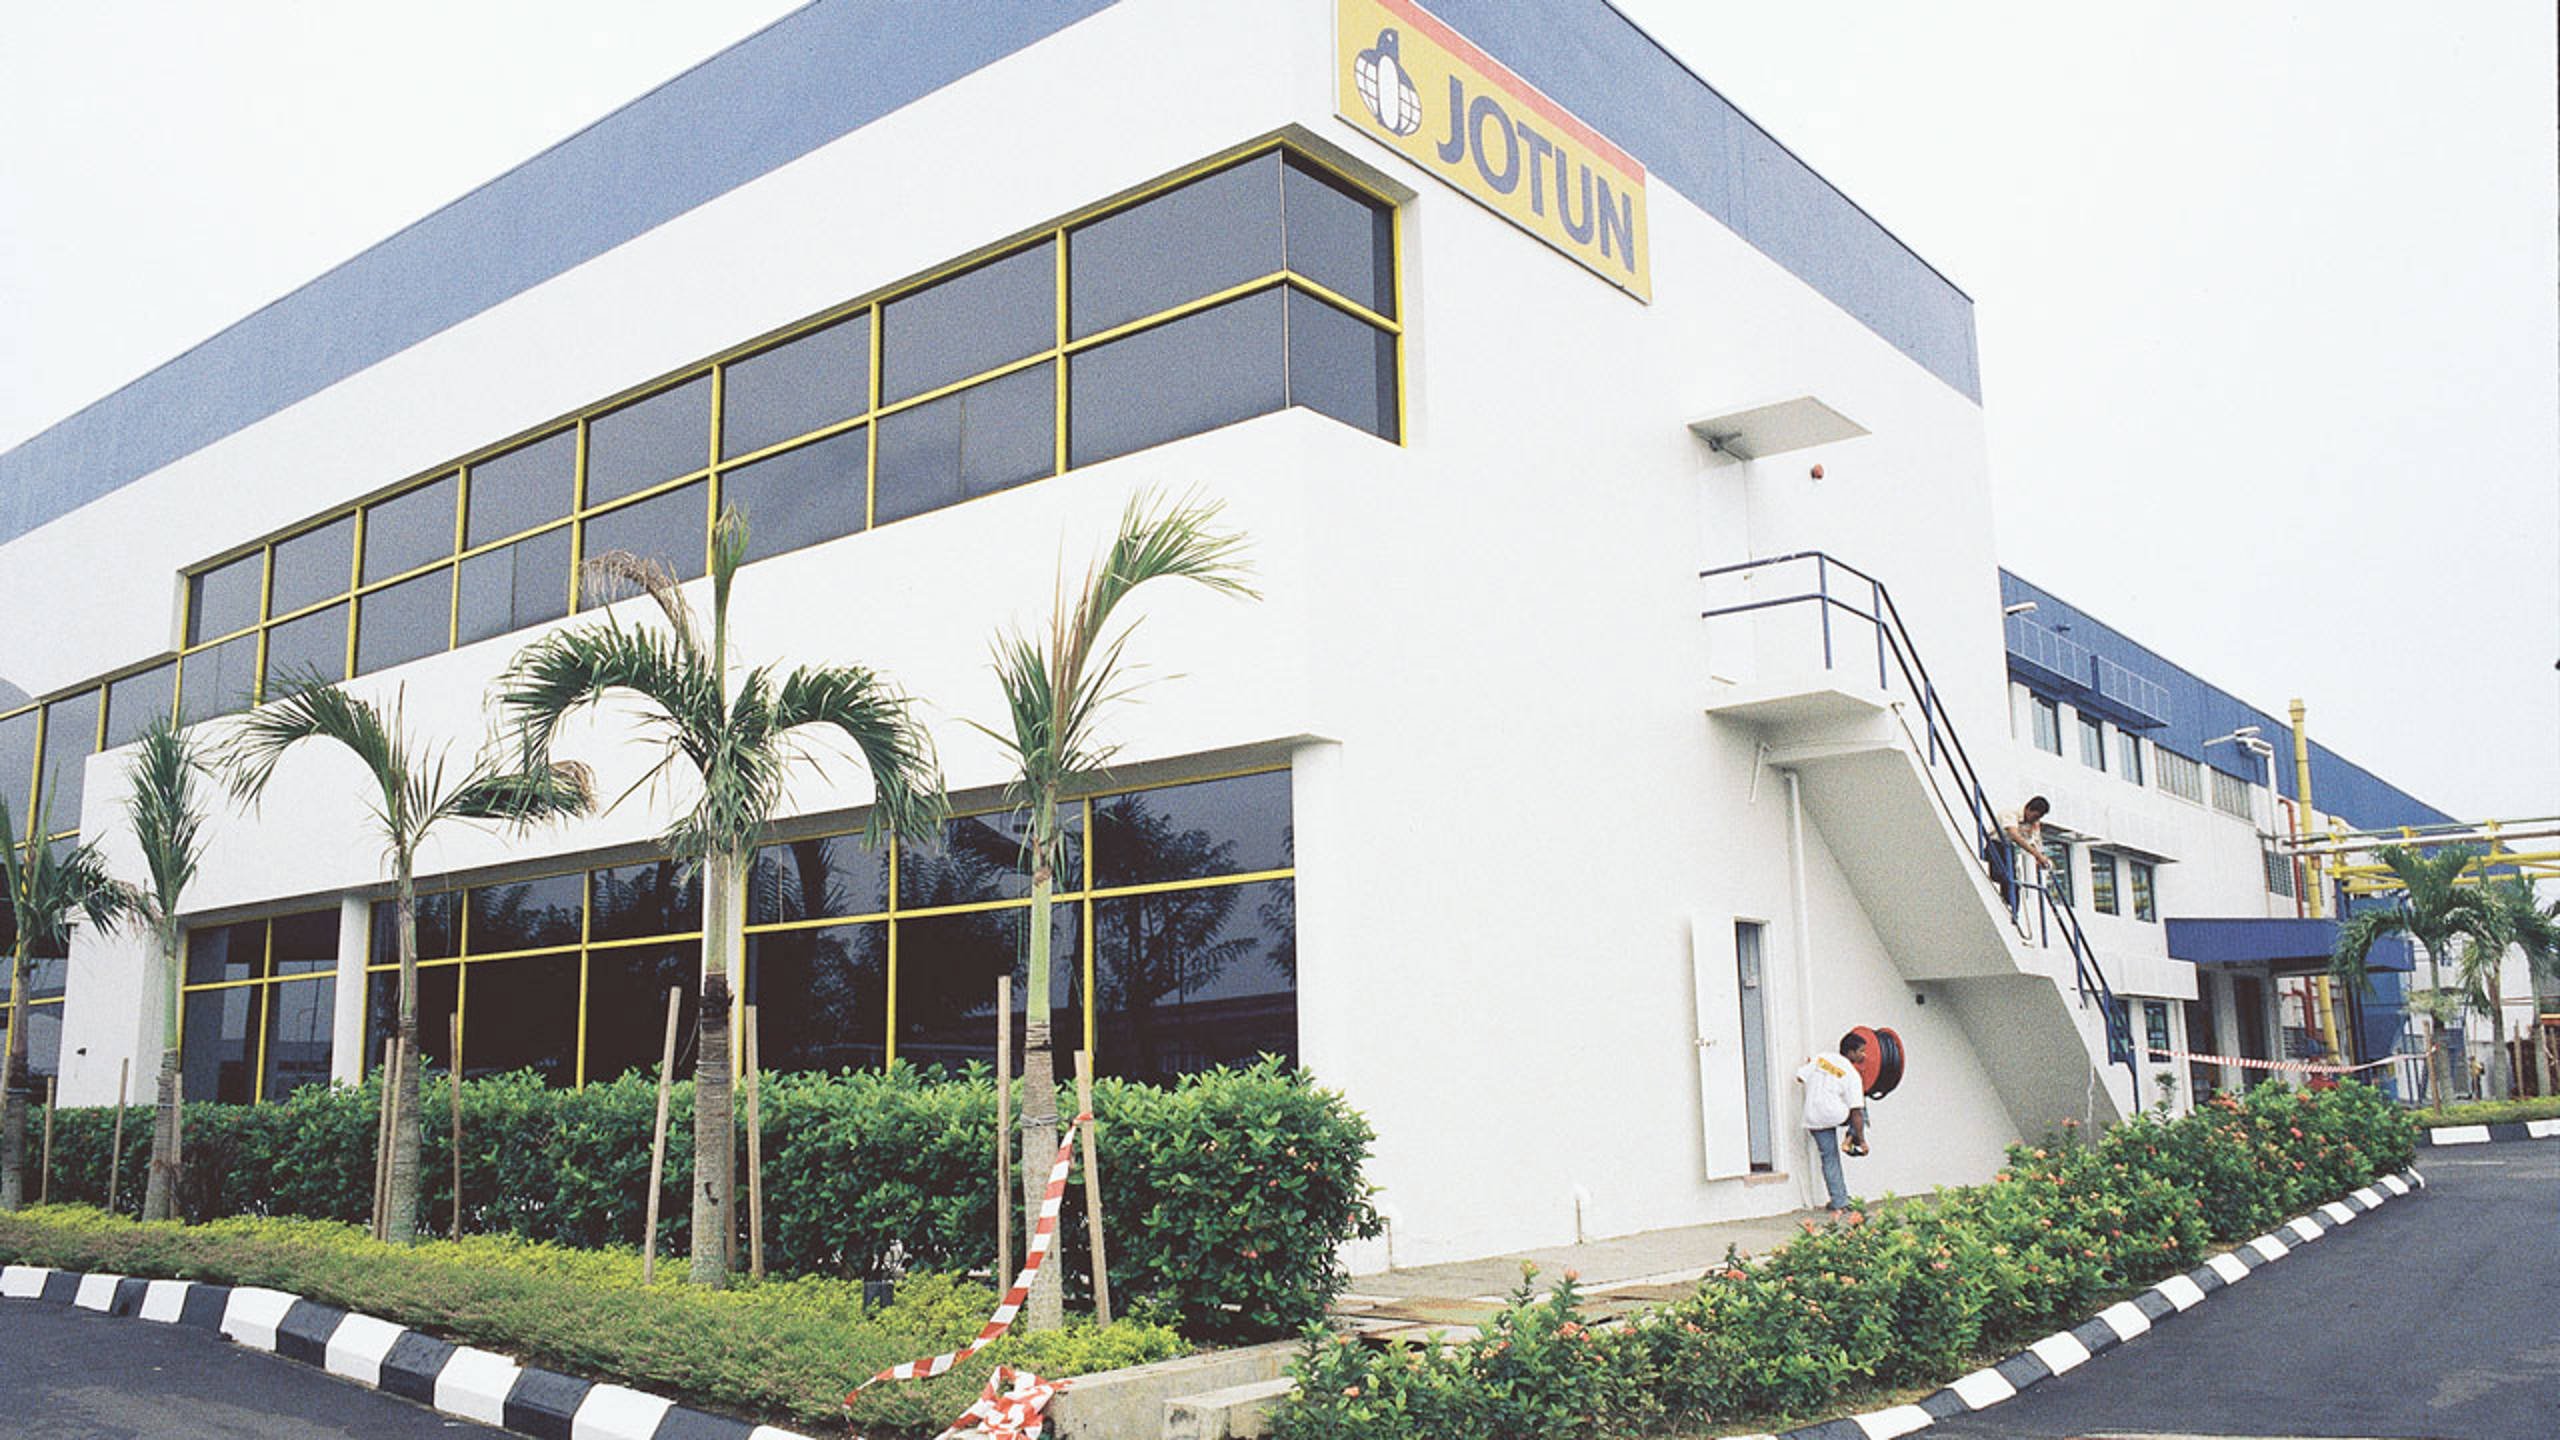 Jotun's R&D center in Malaysia was established in 1994. Today, 17 scientists work here.